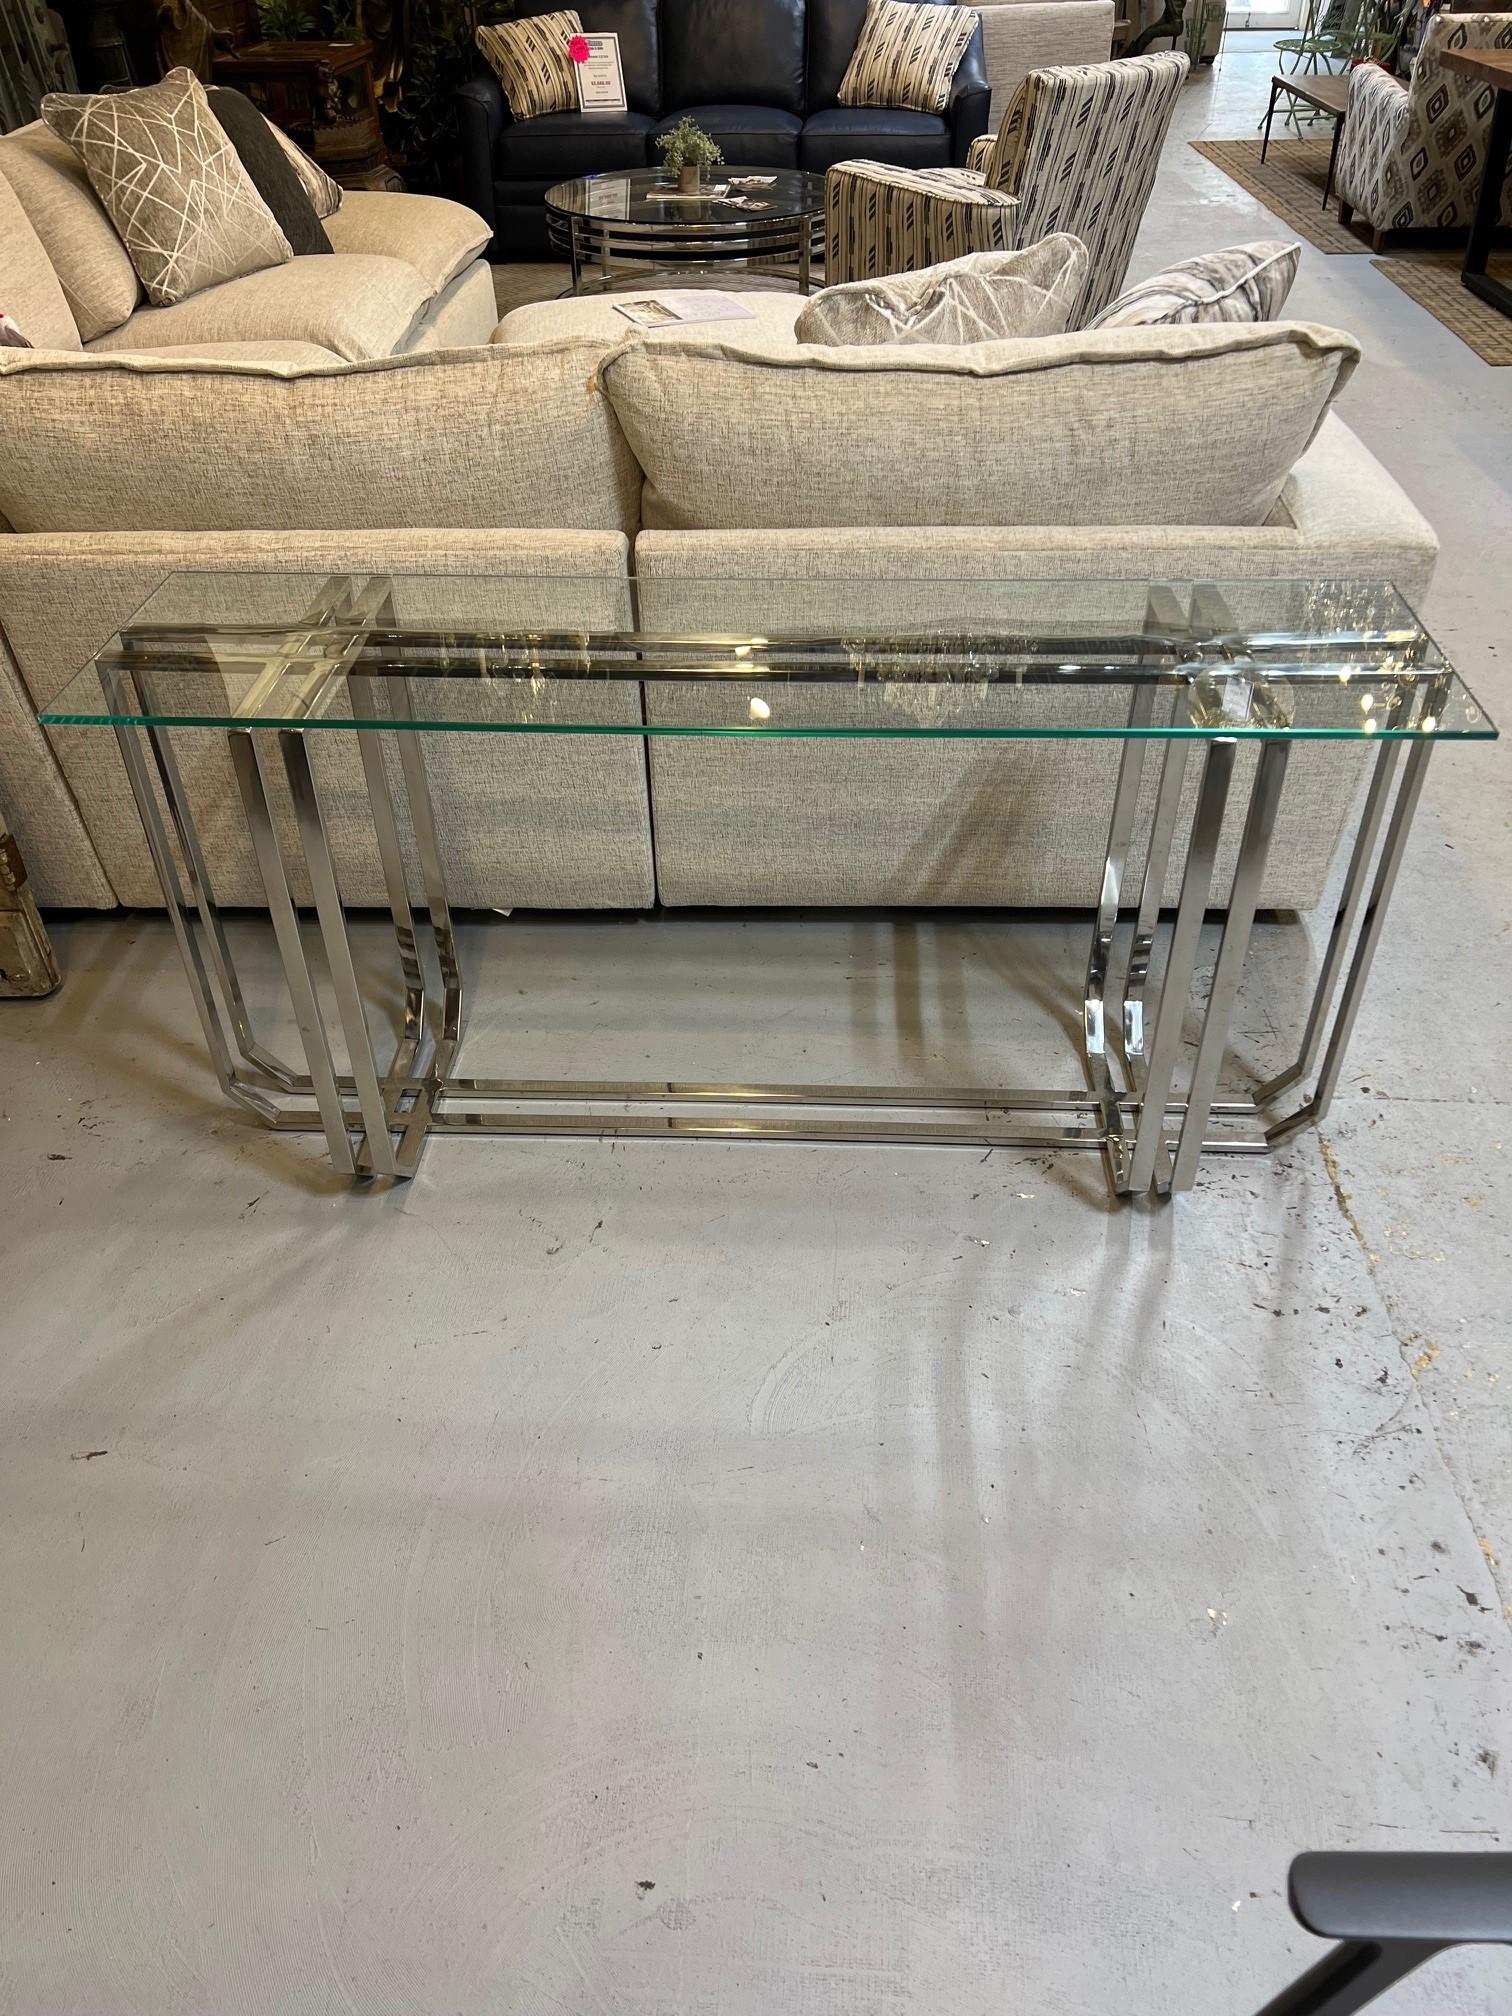 Modern style nickel console table with a clear glass top. A perfect piece for a contemporary design or to add a modern touch. A good piece to use behind a sofa or use in an entrance or dining room. Imported in from India, it has a few scratches but